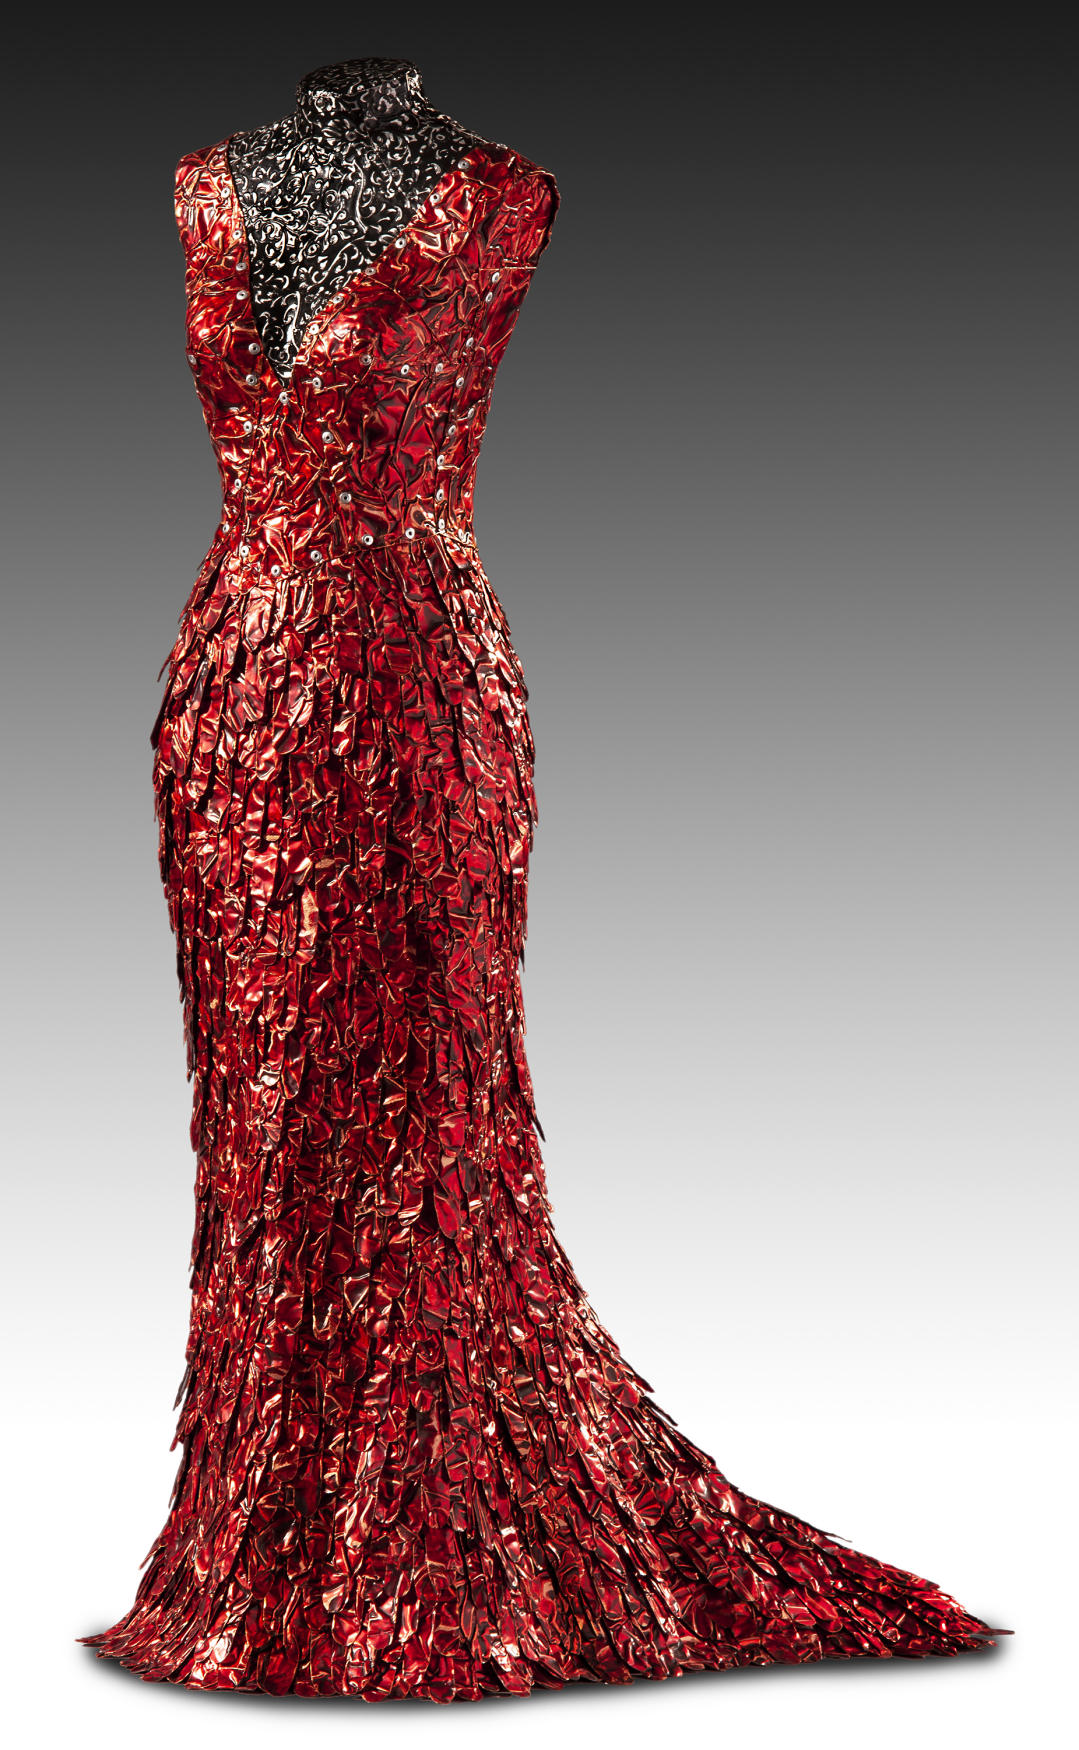 "Red Gown"
29" Tall